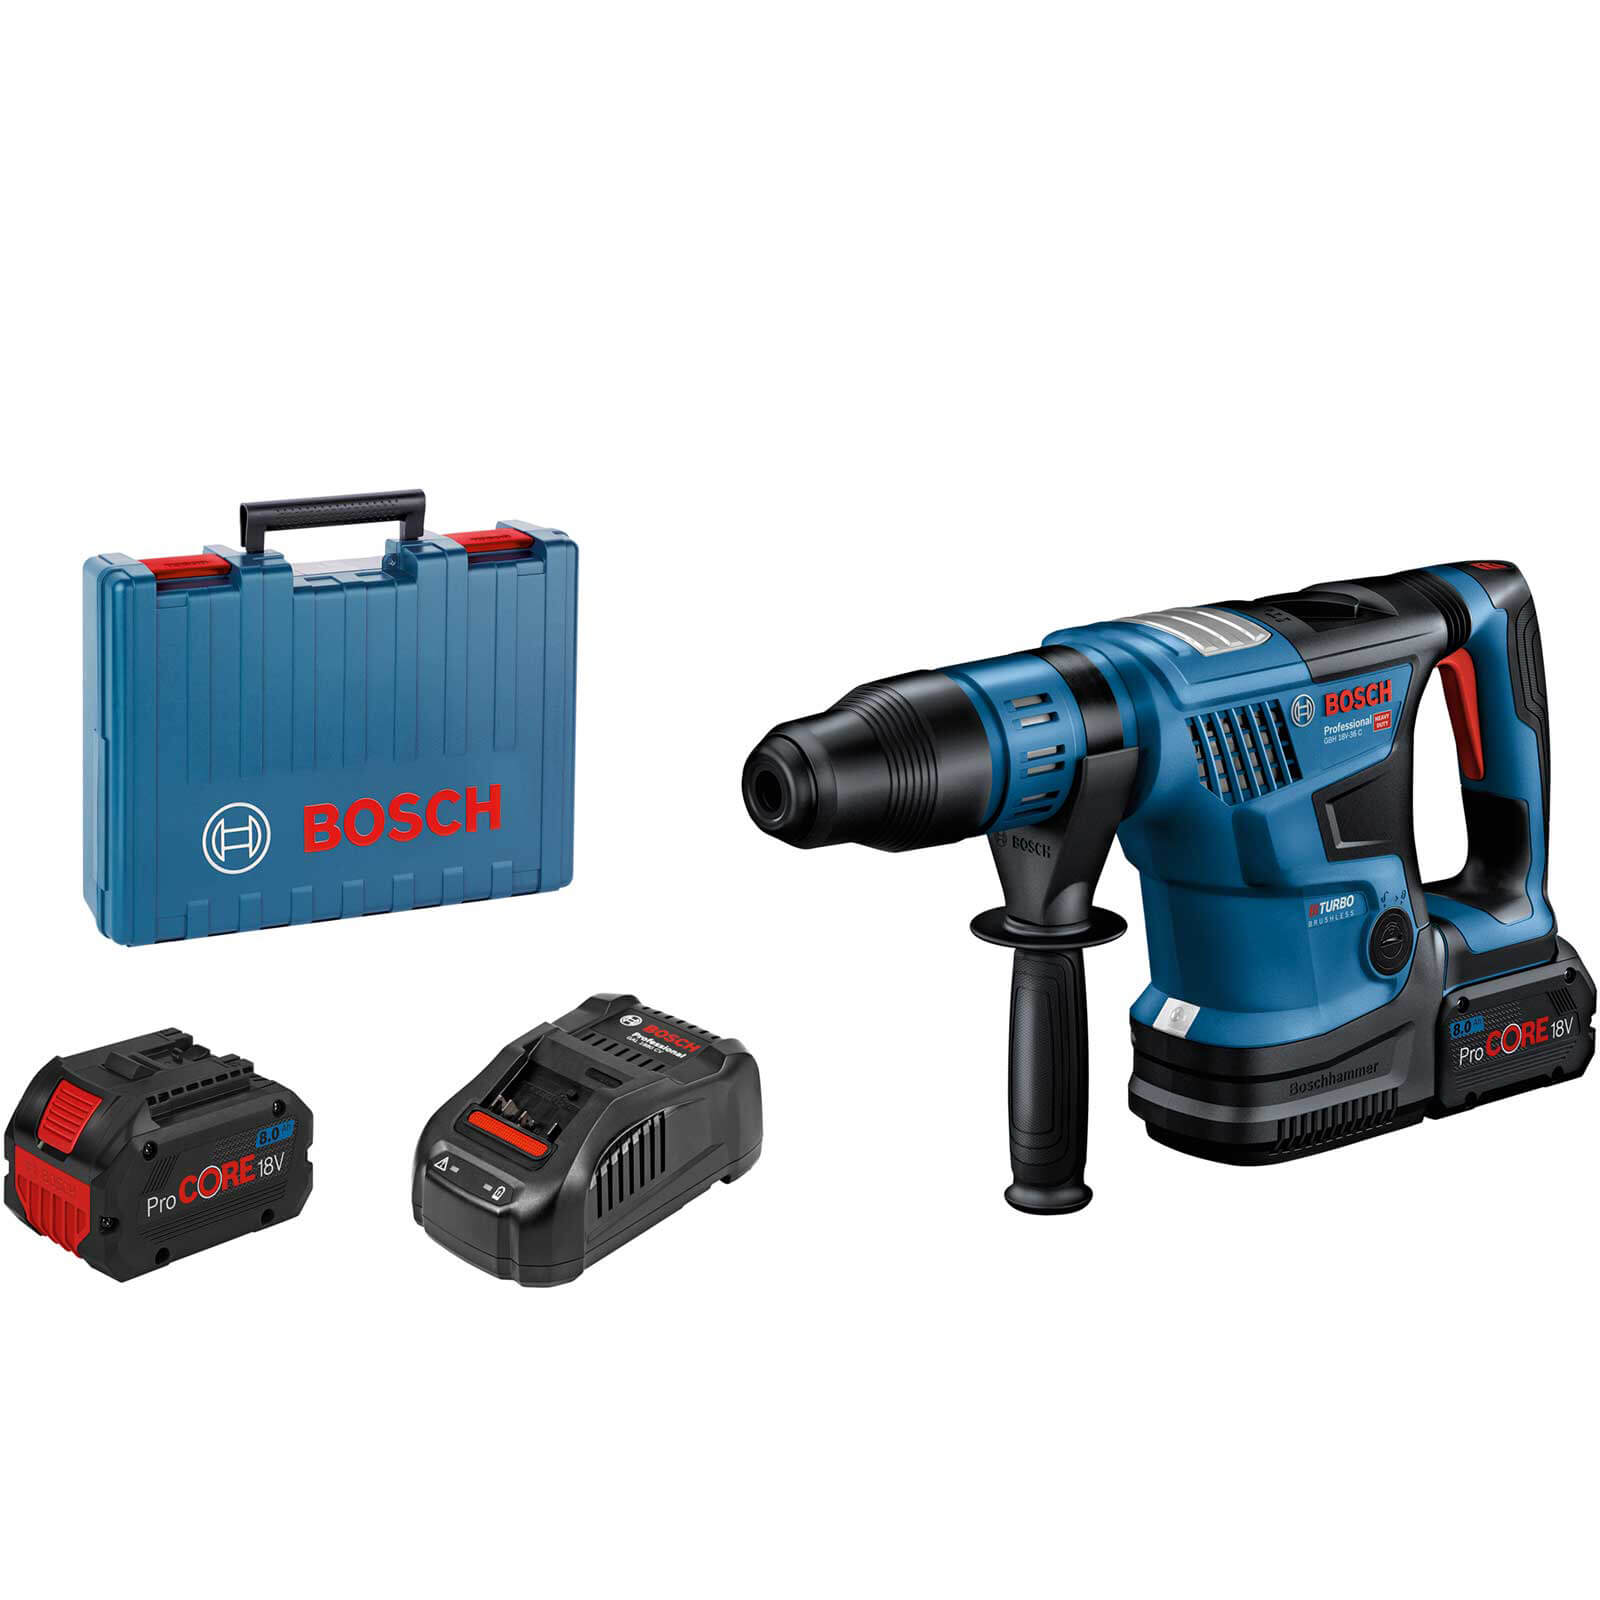 Image of Bosch GBH 18V-36 C BITURBO 18v Brushless SDS MAX Rotary Hammer Drill 2 x 8ah Li-ion Charger Case